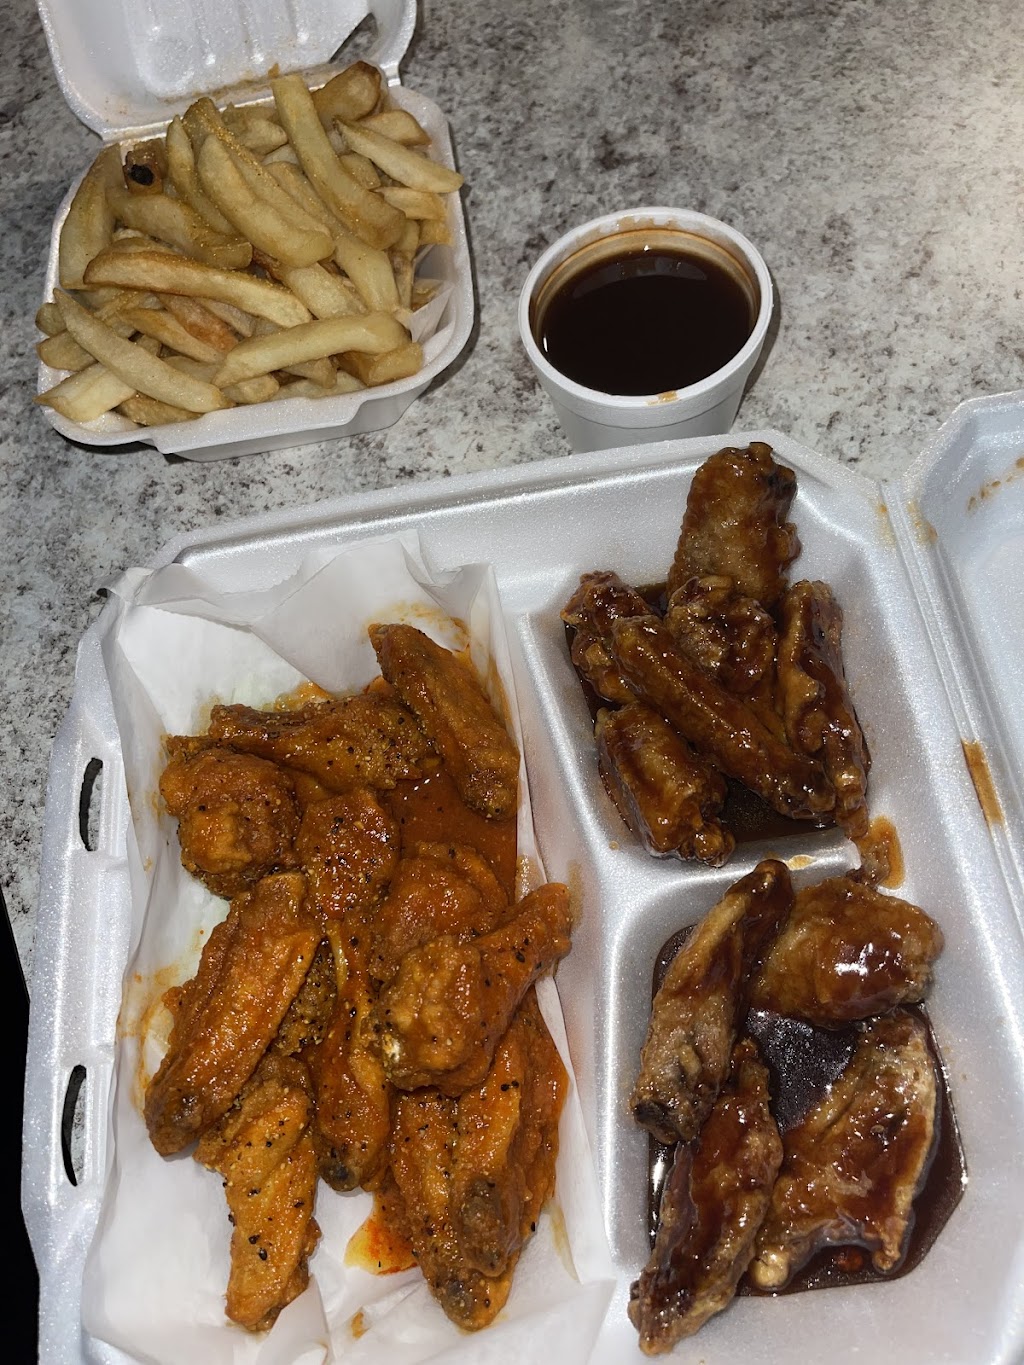 Wings & Seafood | 1046 Holcombe Rd, Decatur, GA 30032, USA | Phone: (404) 508-6172